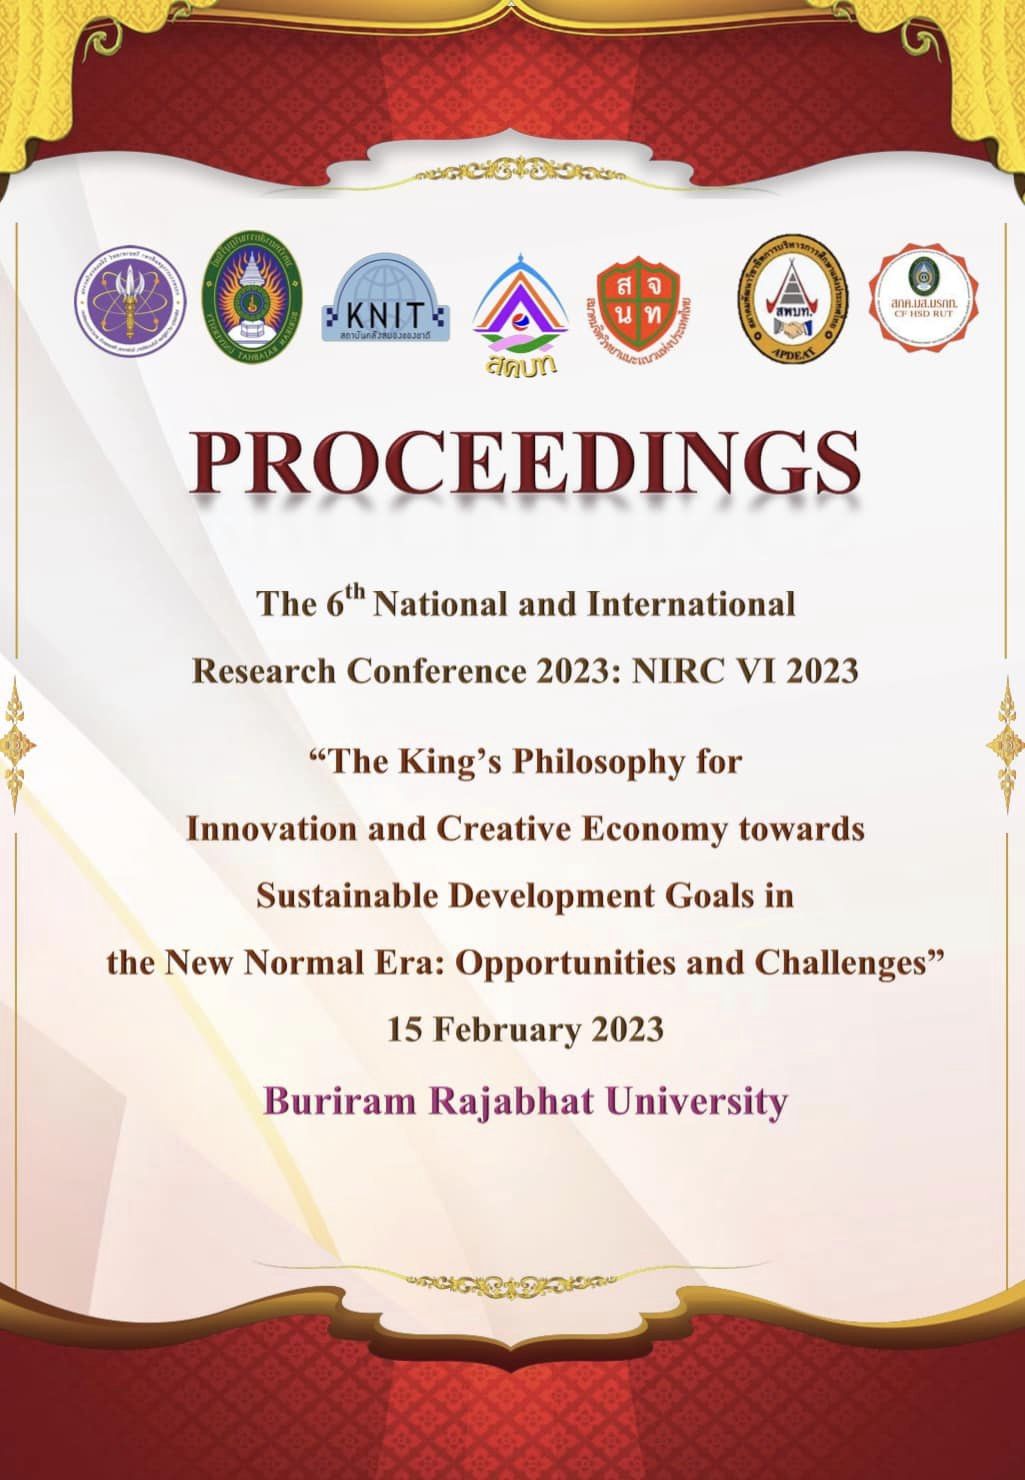 The 6<sup>th</sup> National and International Research Conference 2023 : NIRC VI 2023